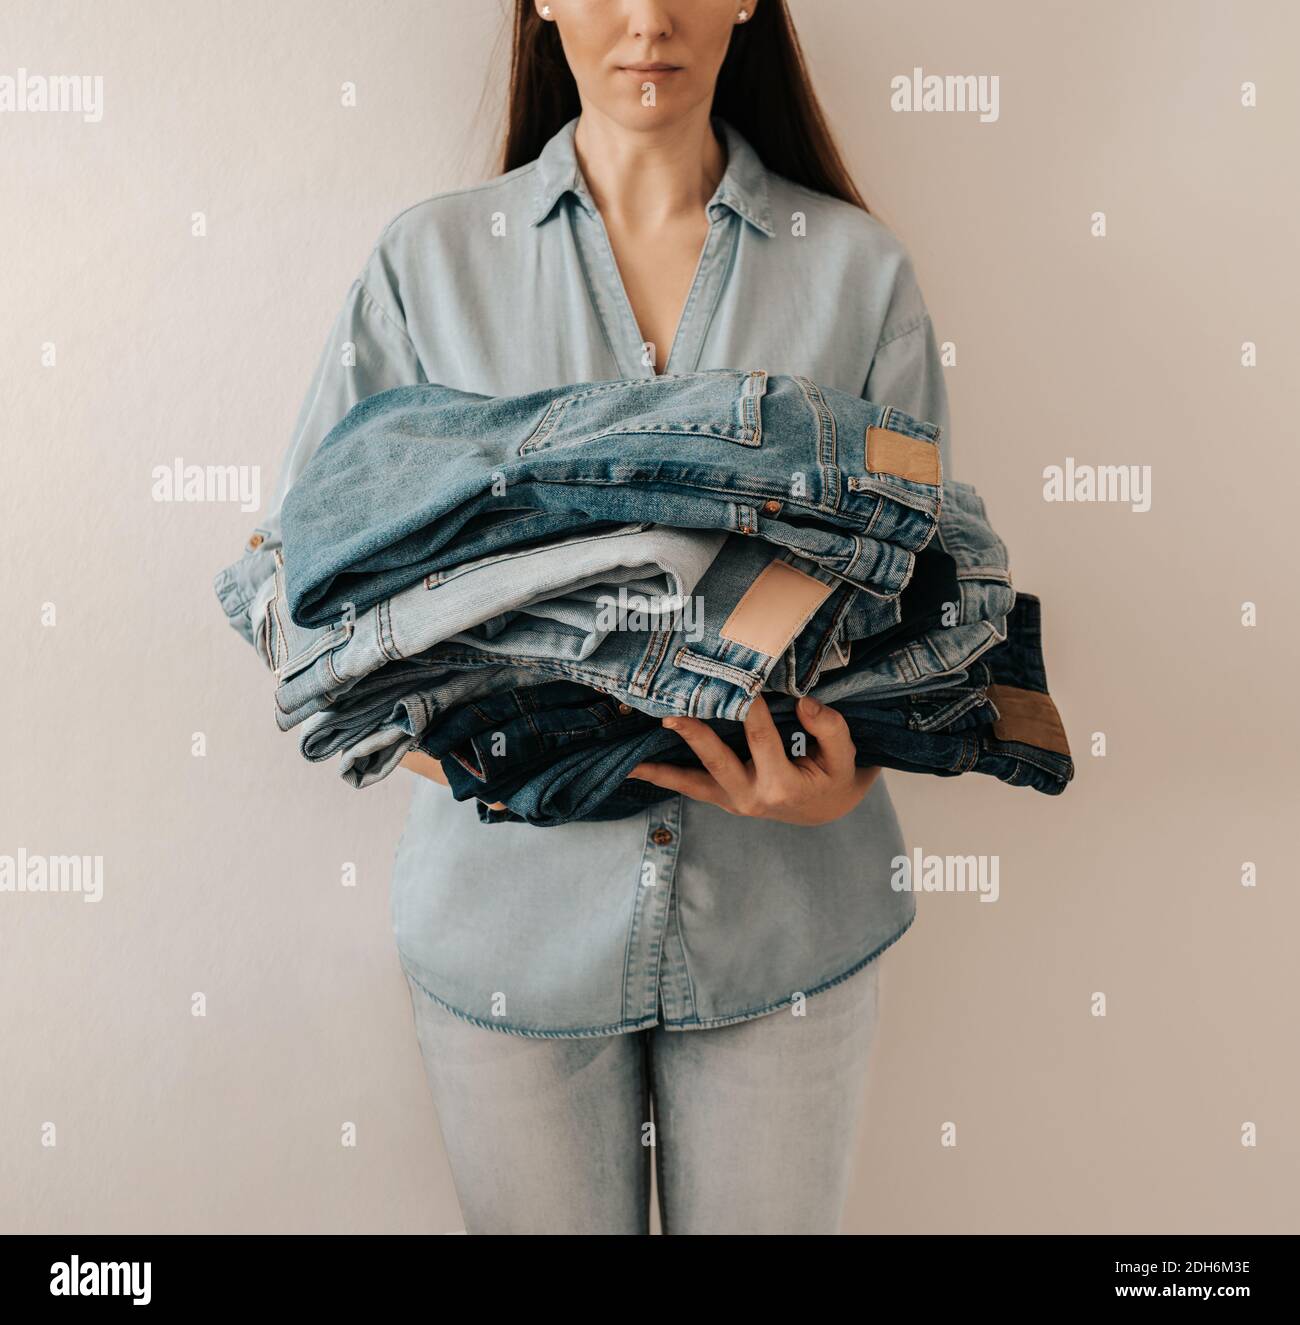 Denim care, jeans sale, recycling wear, fast fashion concept Stock Photo